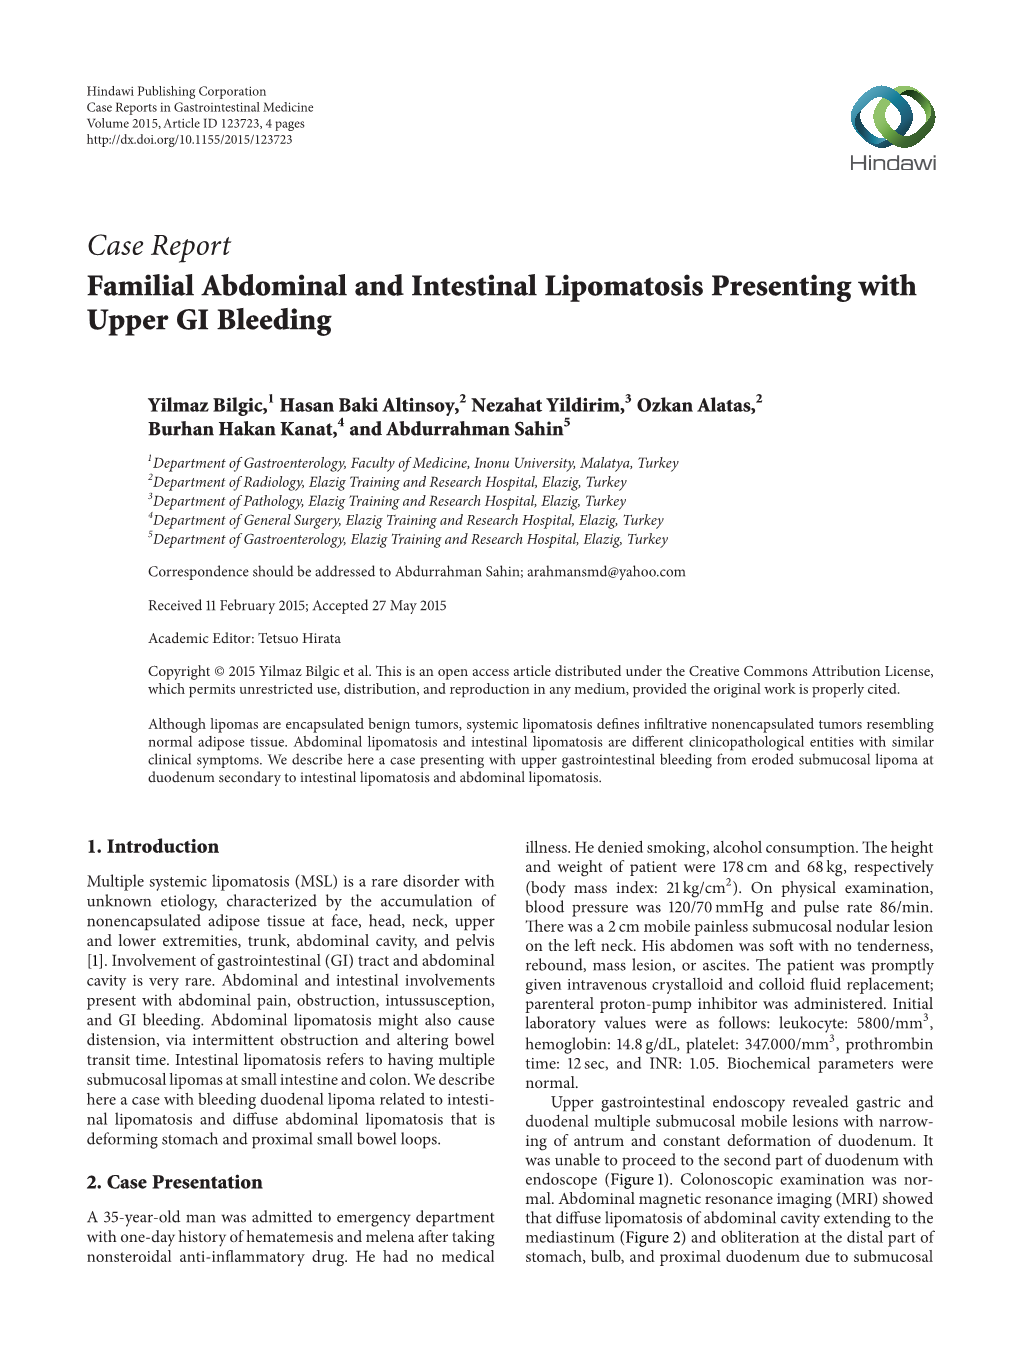 Case Report Familial Abdominal and Intestinal Lipomatosis Presenting with Upper GI Bleeding